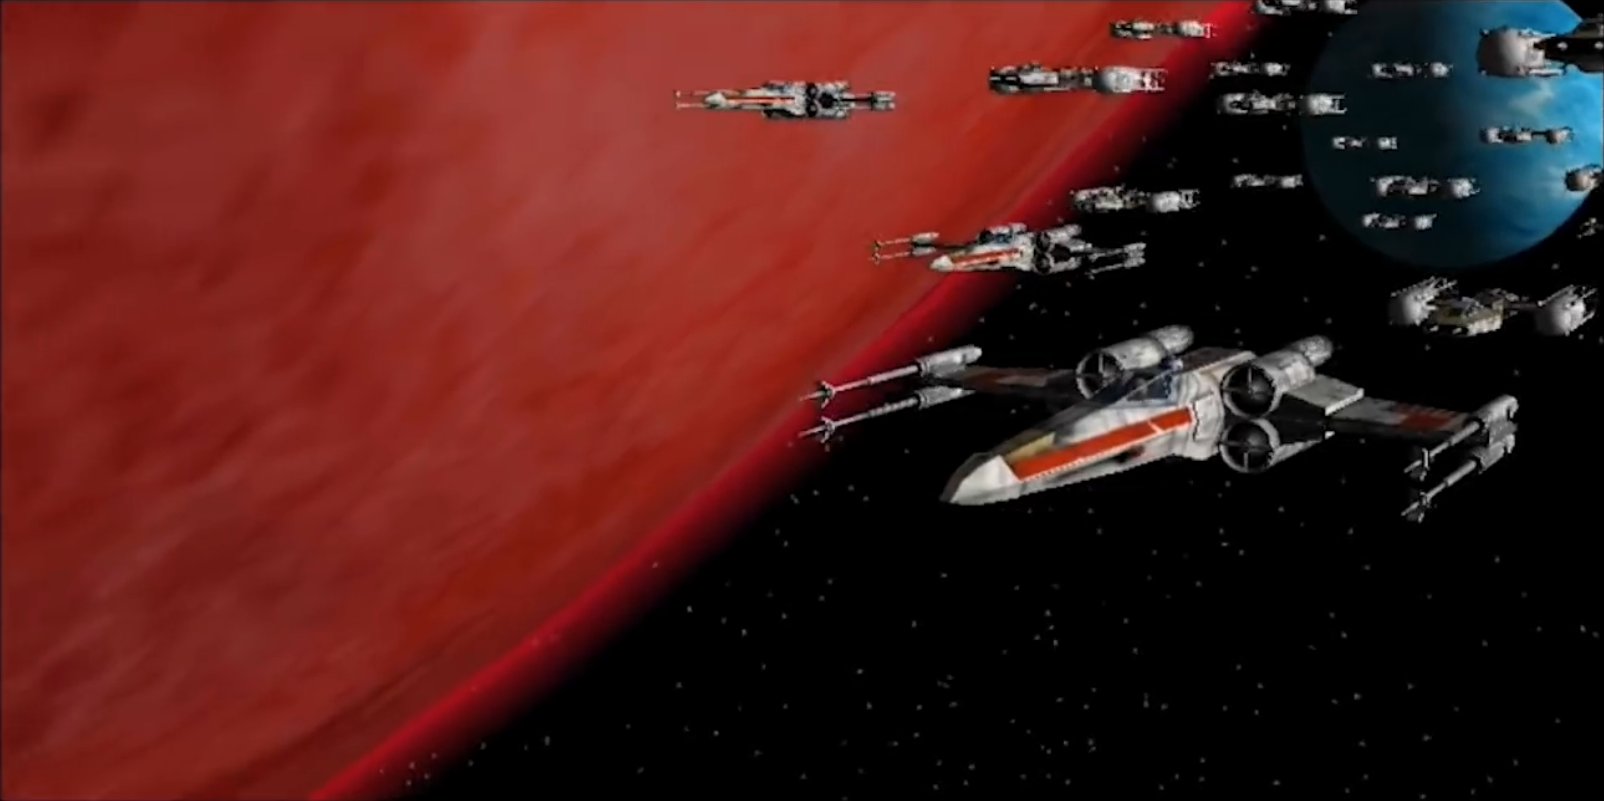 Star Wars Visual Comparisons Twitterren: Watching a video, I couldn't help but notice that the Star Wars Trilogy Arcade tucked Yavin IV & the Death Star around the planet from each